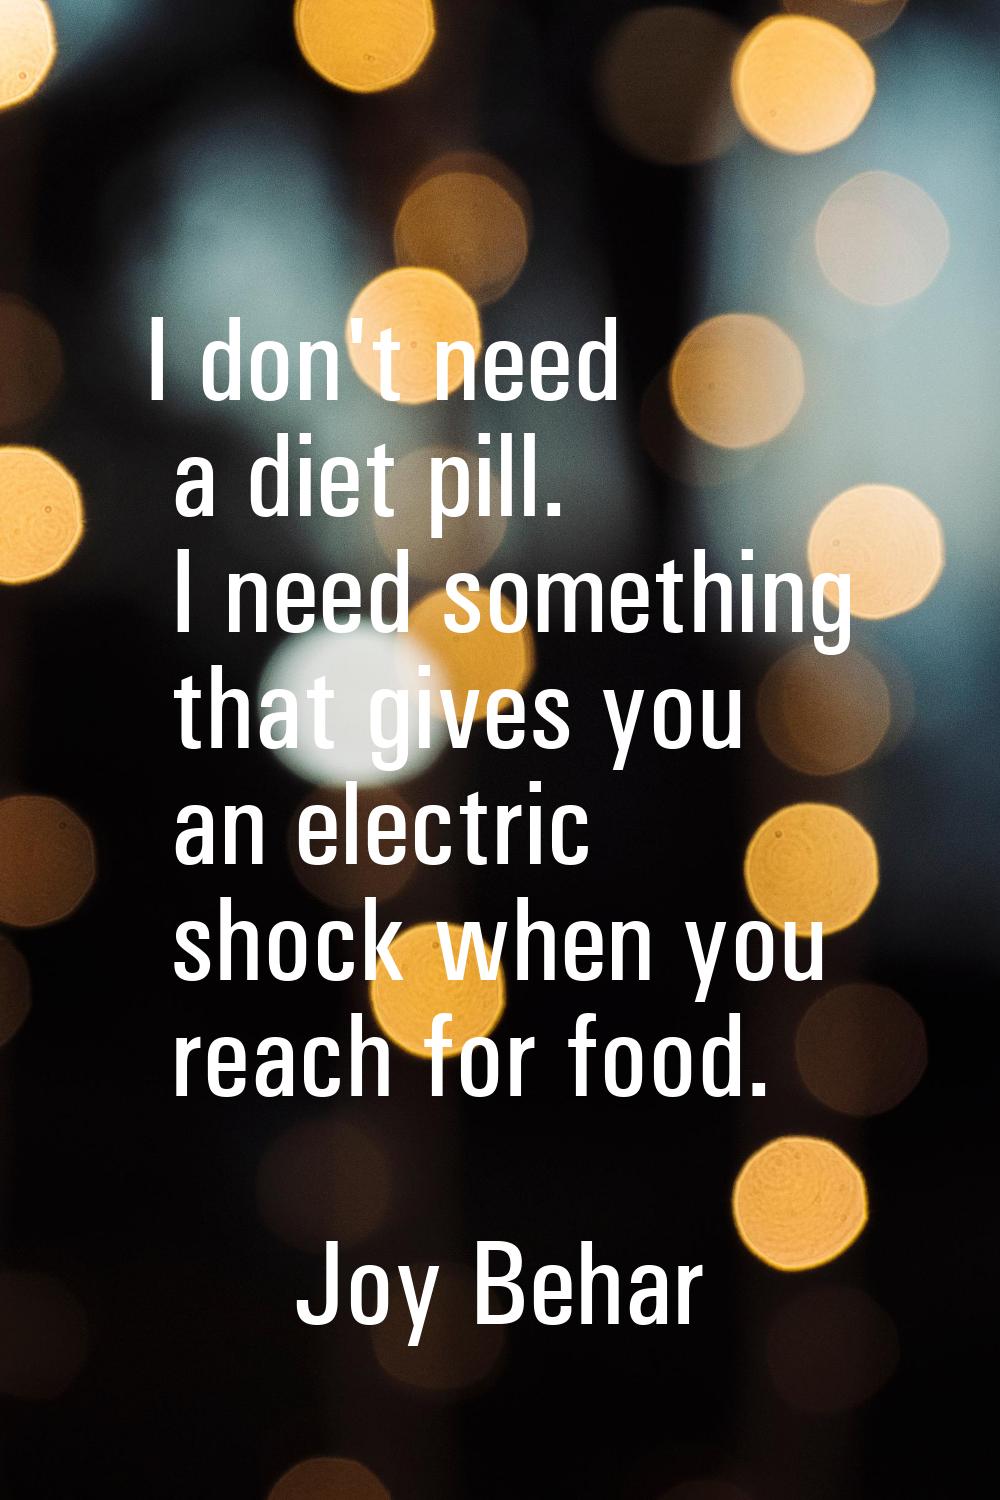 I don't need a diet pill. I need something that gives you an electric shock when you reach for food